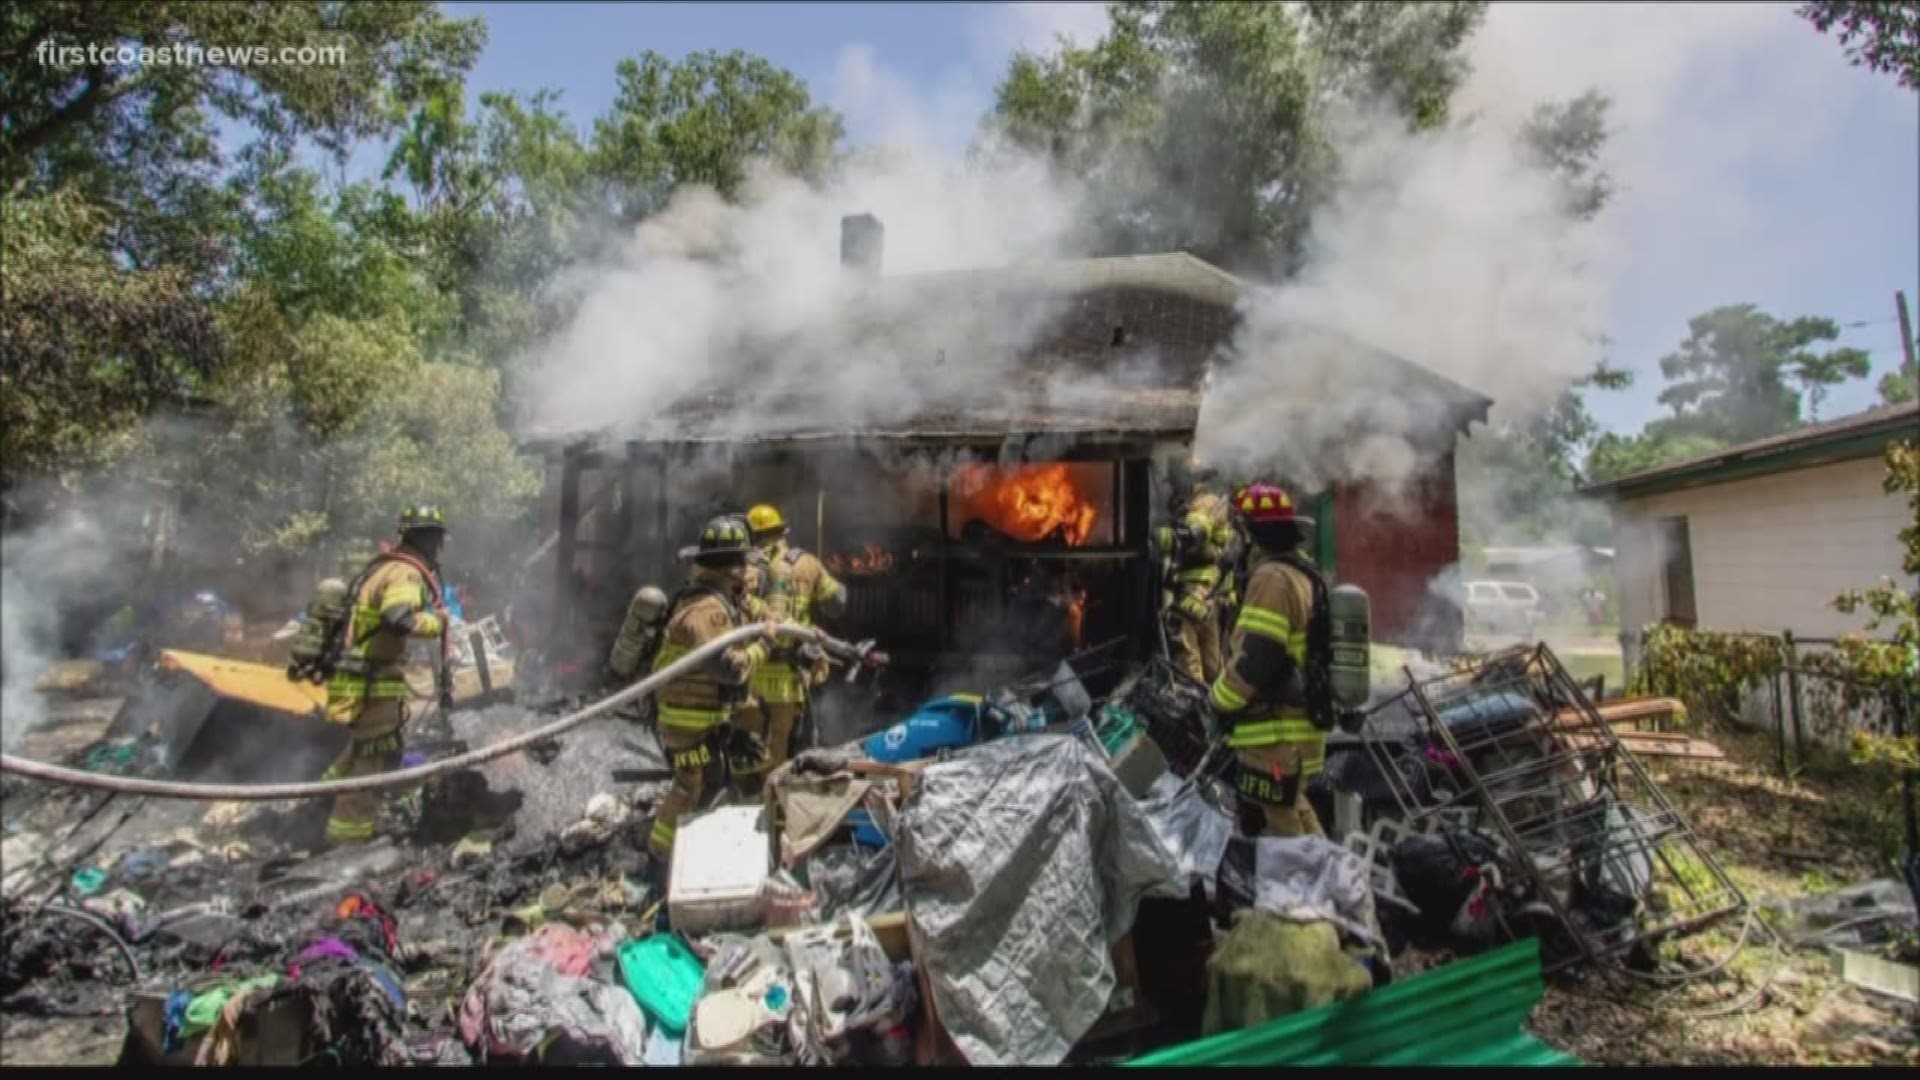 A fire ripped through a home in Moncrief Monday afternoon, according to the Jacksonville Fire and Rescue Department.